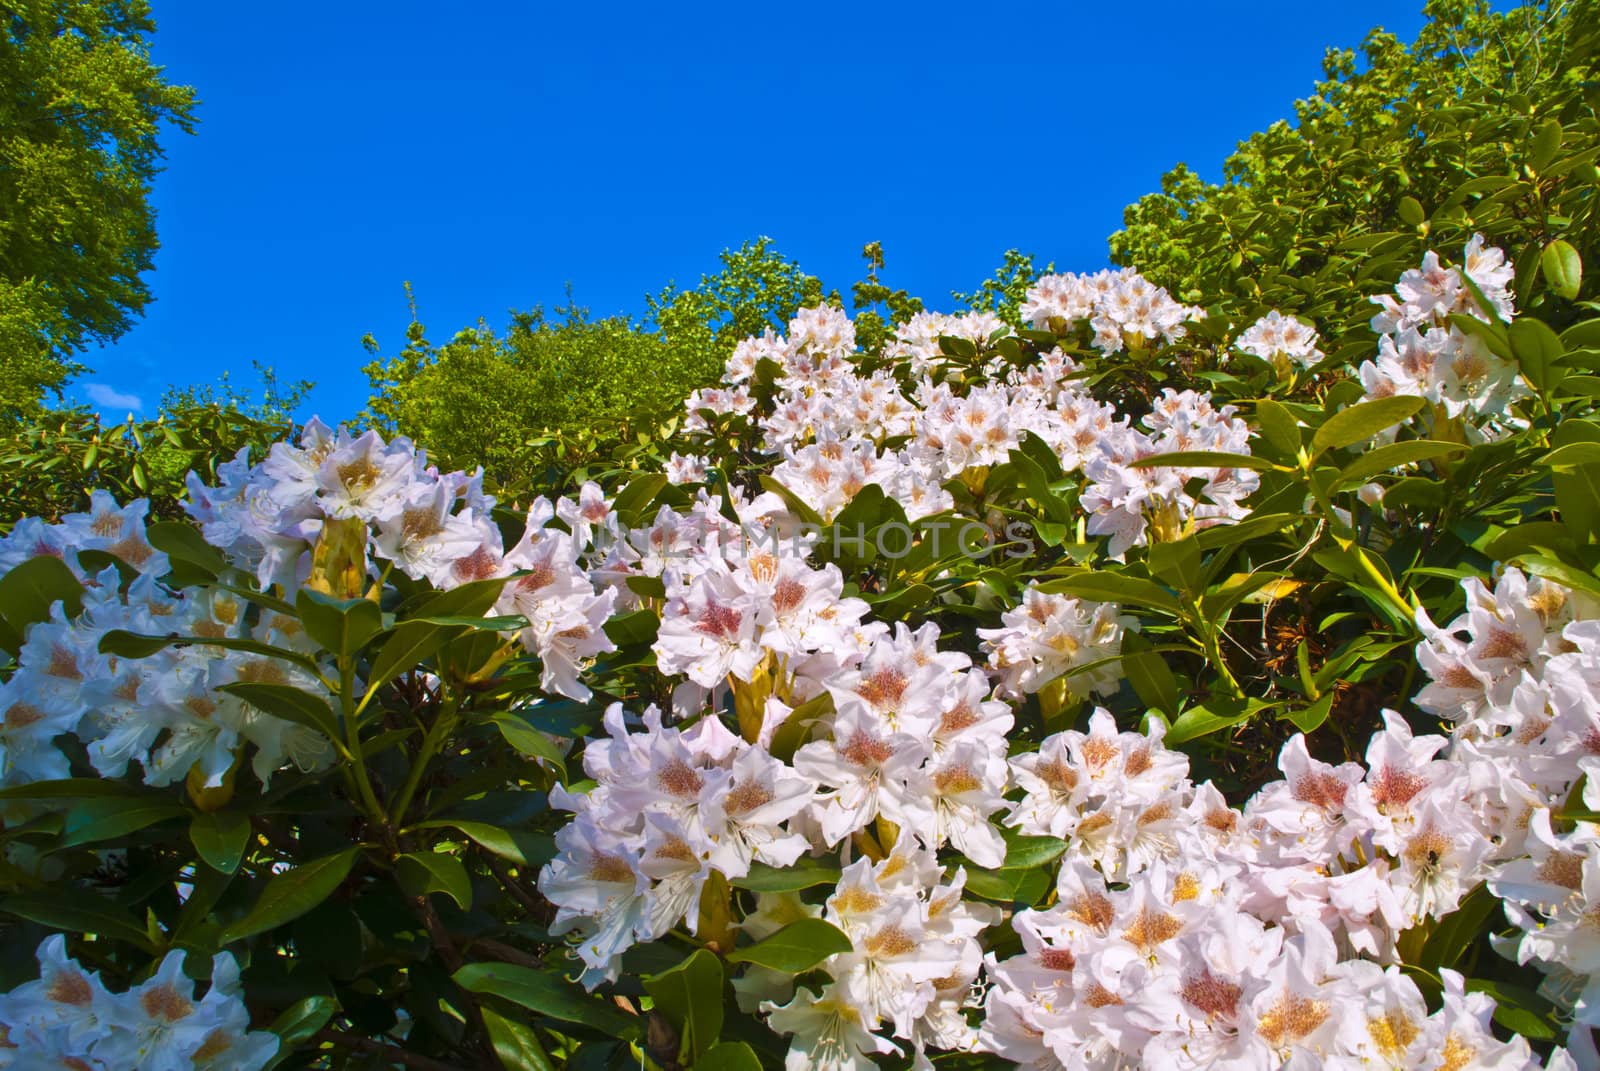 Rhododendron on the Red Mansion by steirus